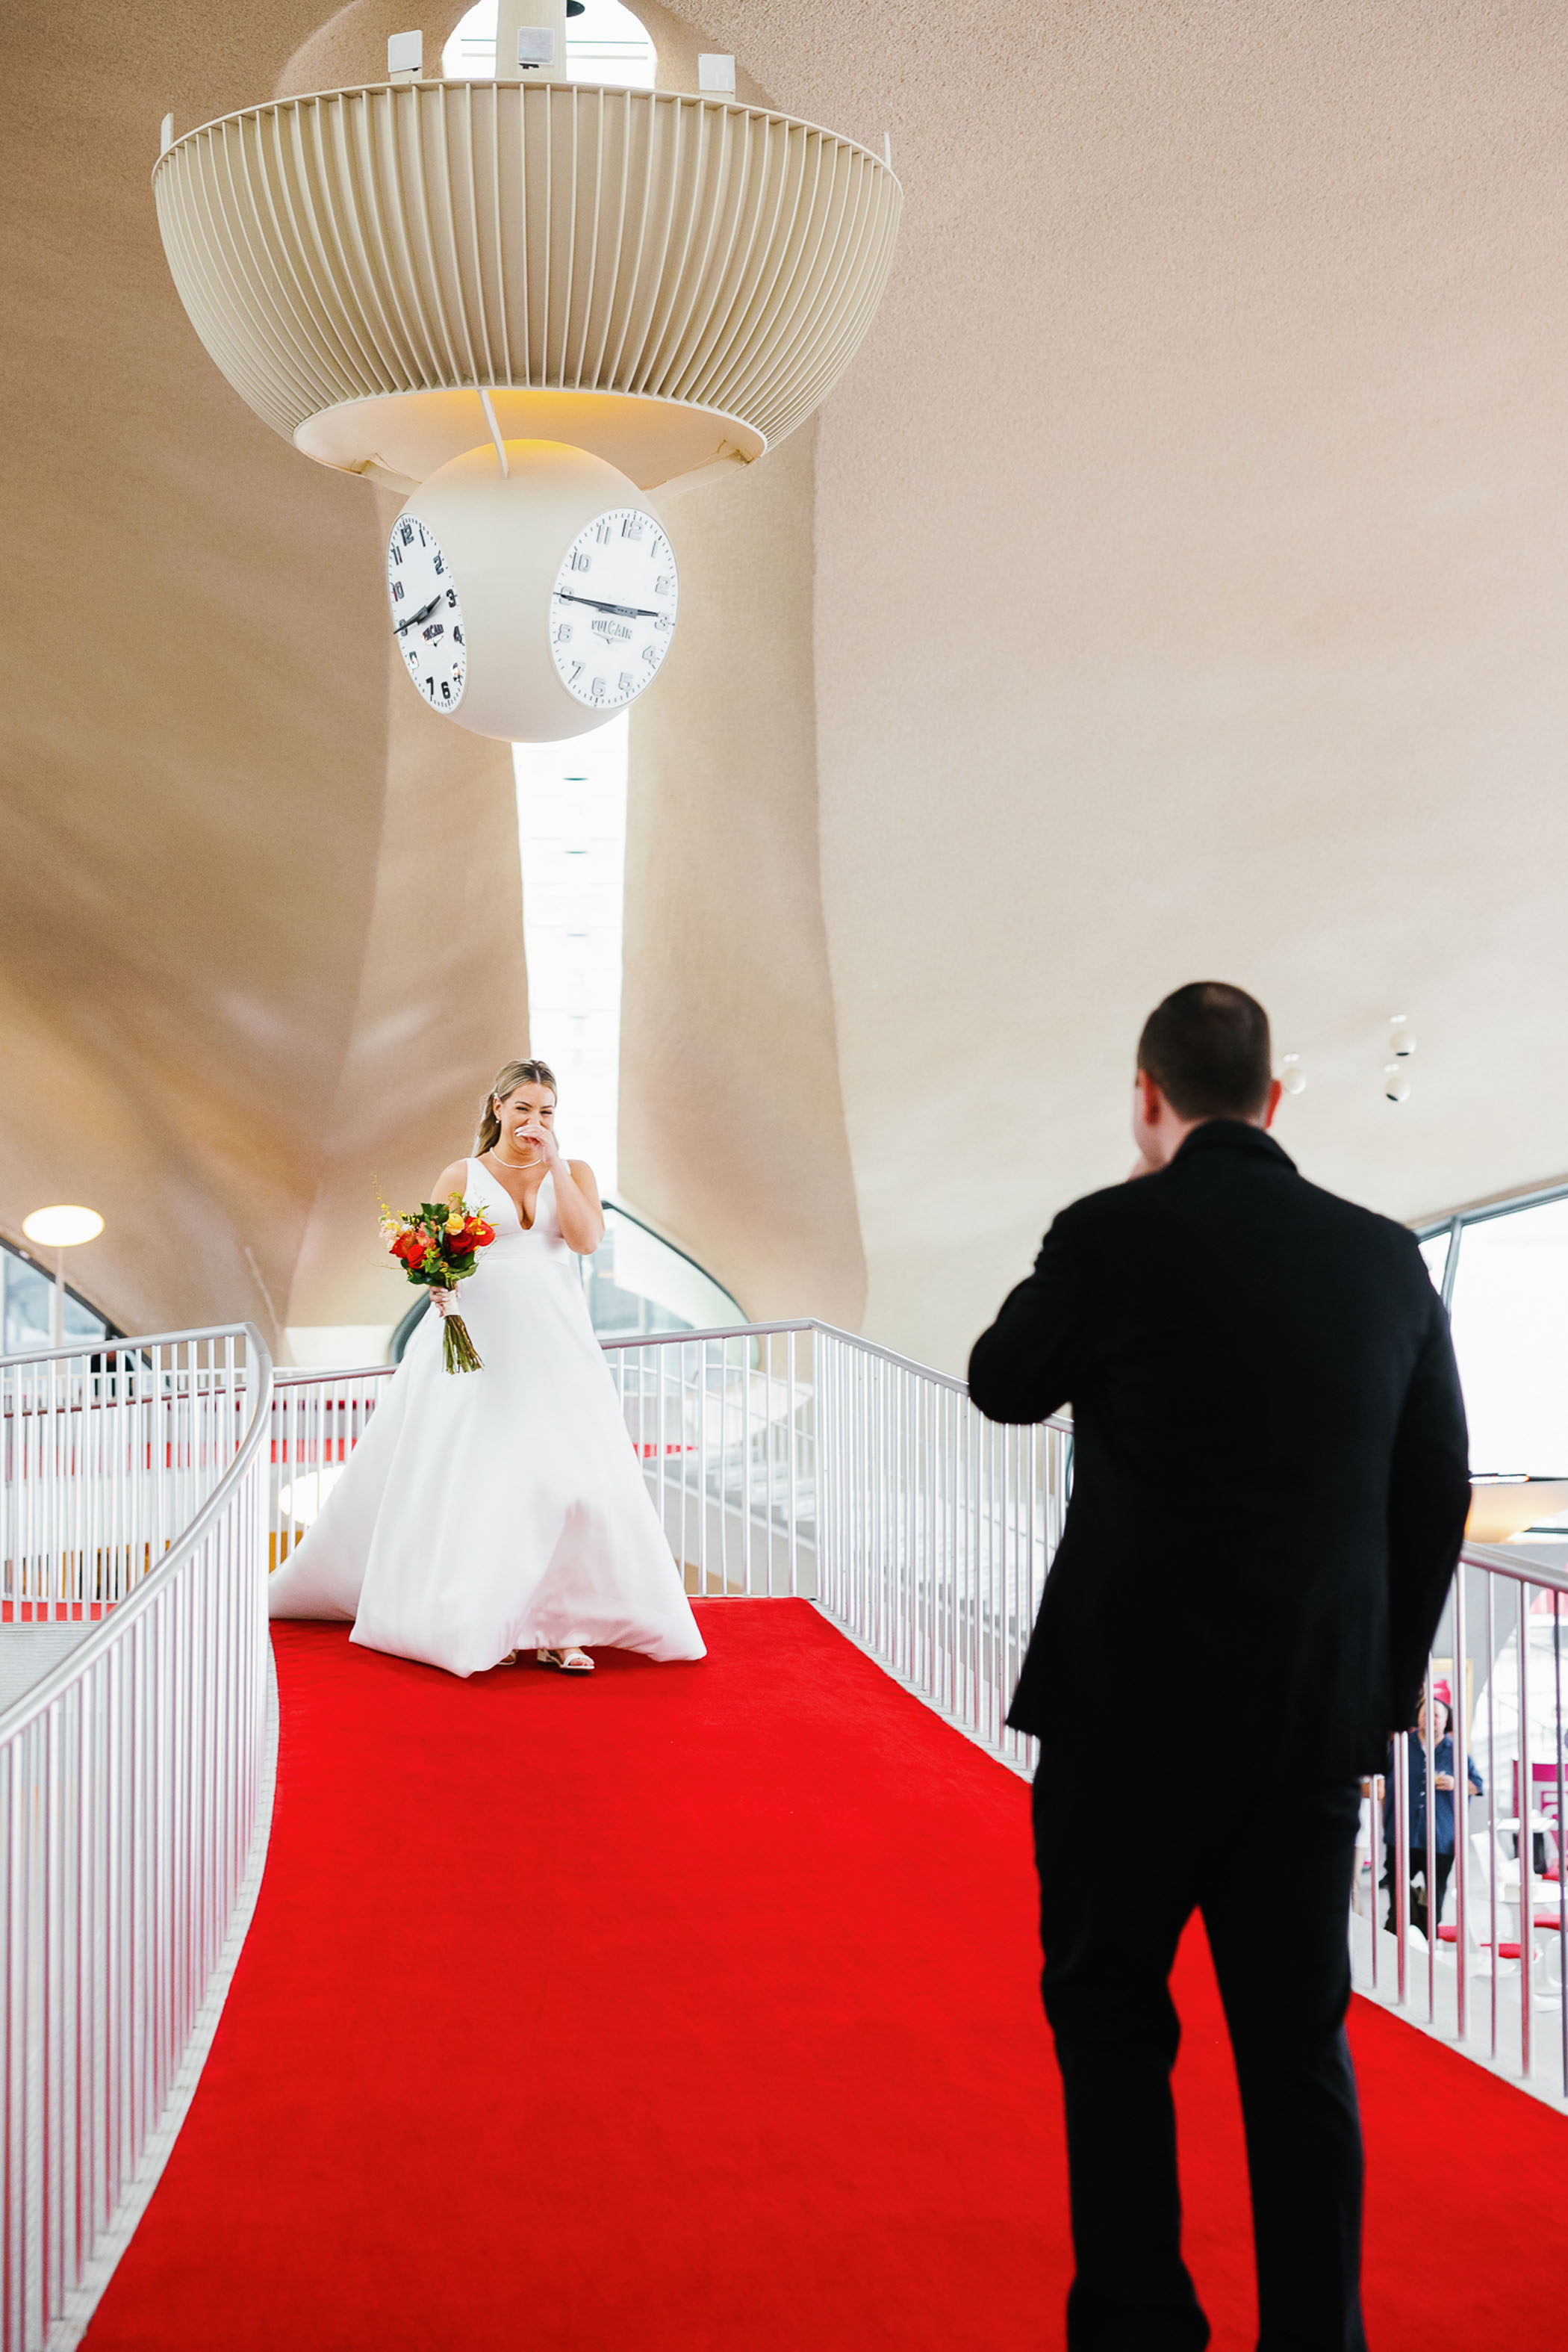 60s Wedding at TWA Hotel for a Pilot and Flight Attendant